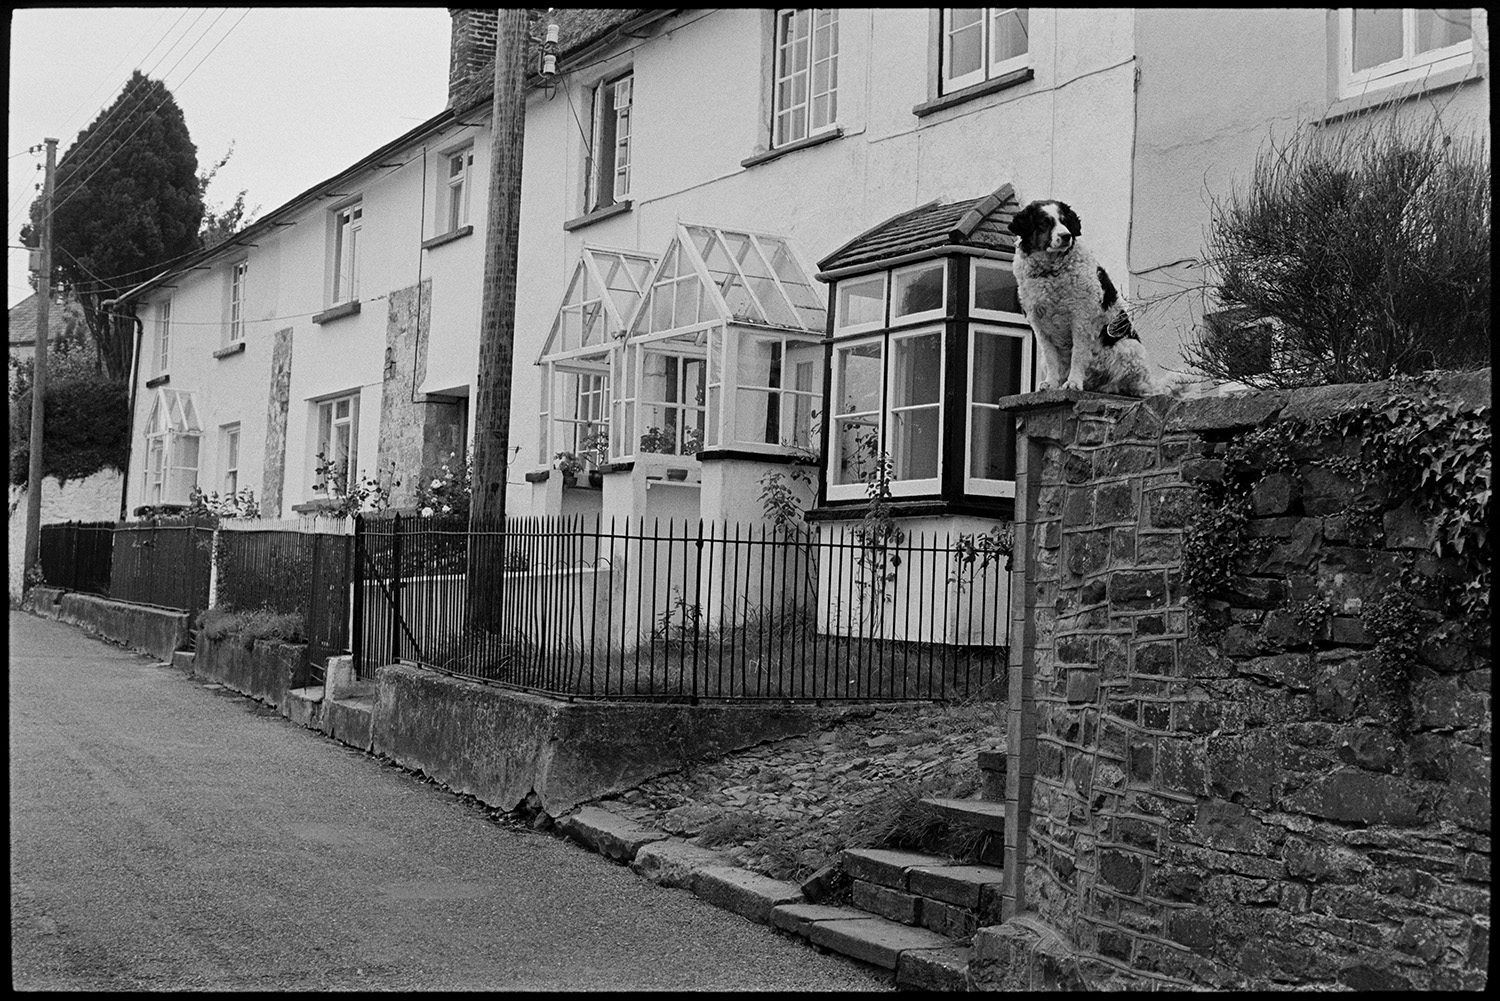 Street scene with dog. 
[A dog sat on a wall by a street in Hatherleigh. Houses and railings can be seen further along the street. Some of the houses have porches.]